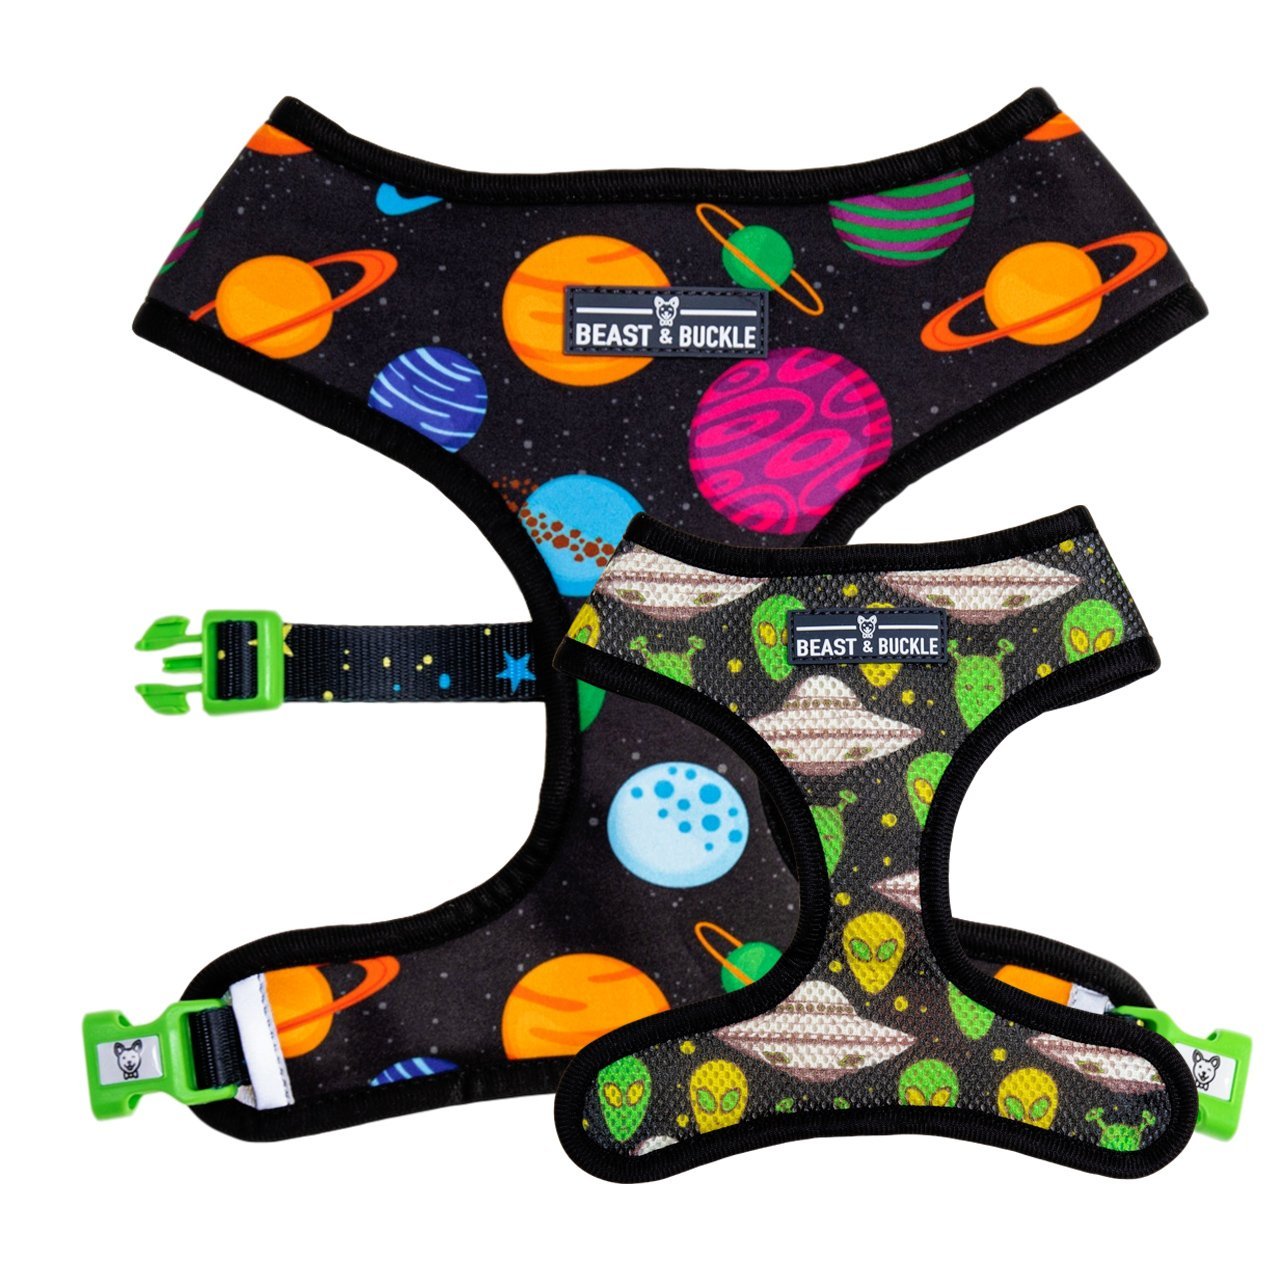 outer-space-reversible-dog-harness-504308_1800x1800